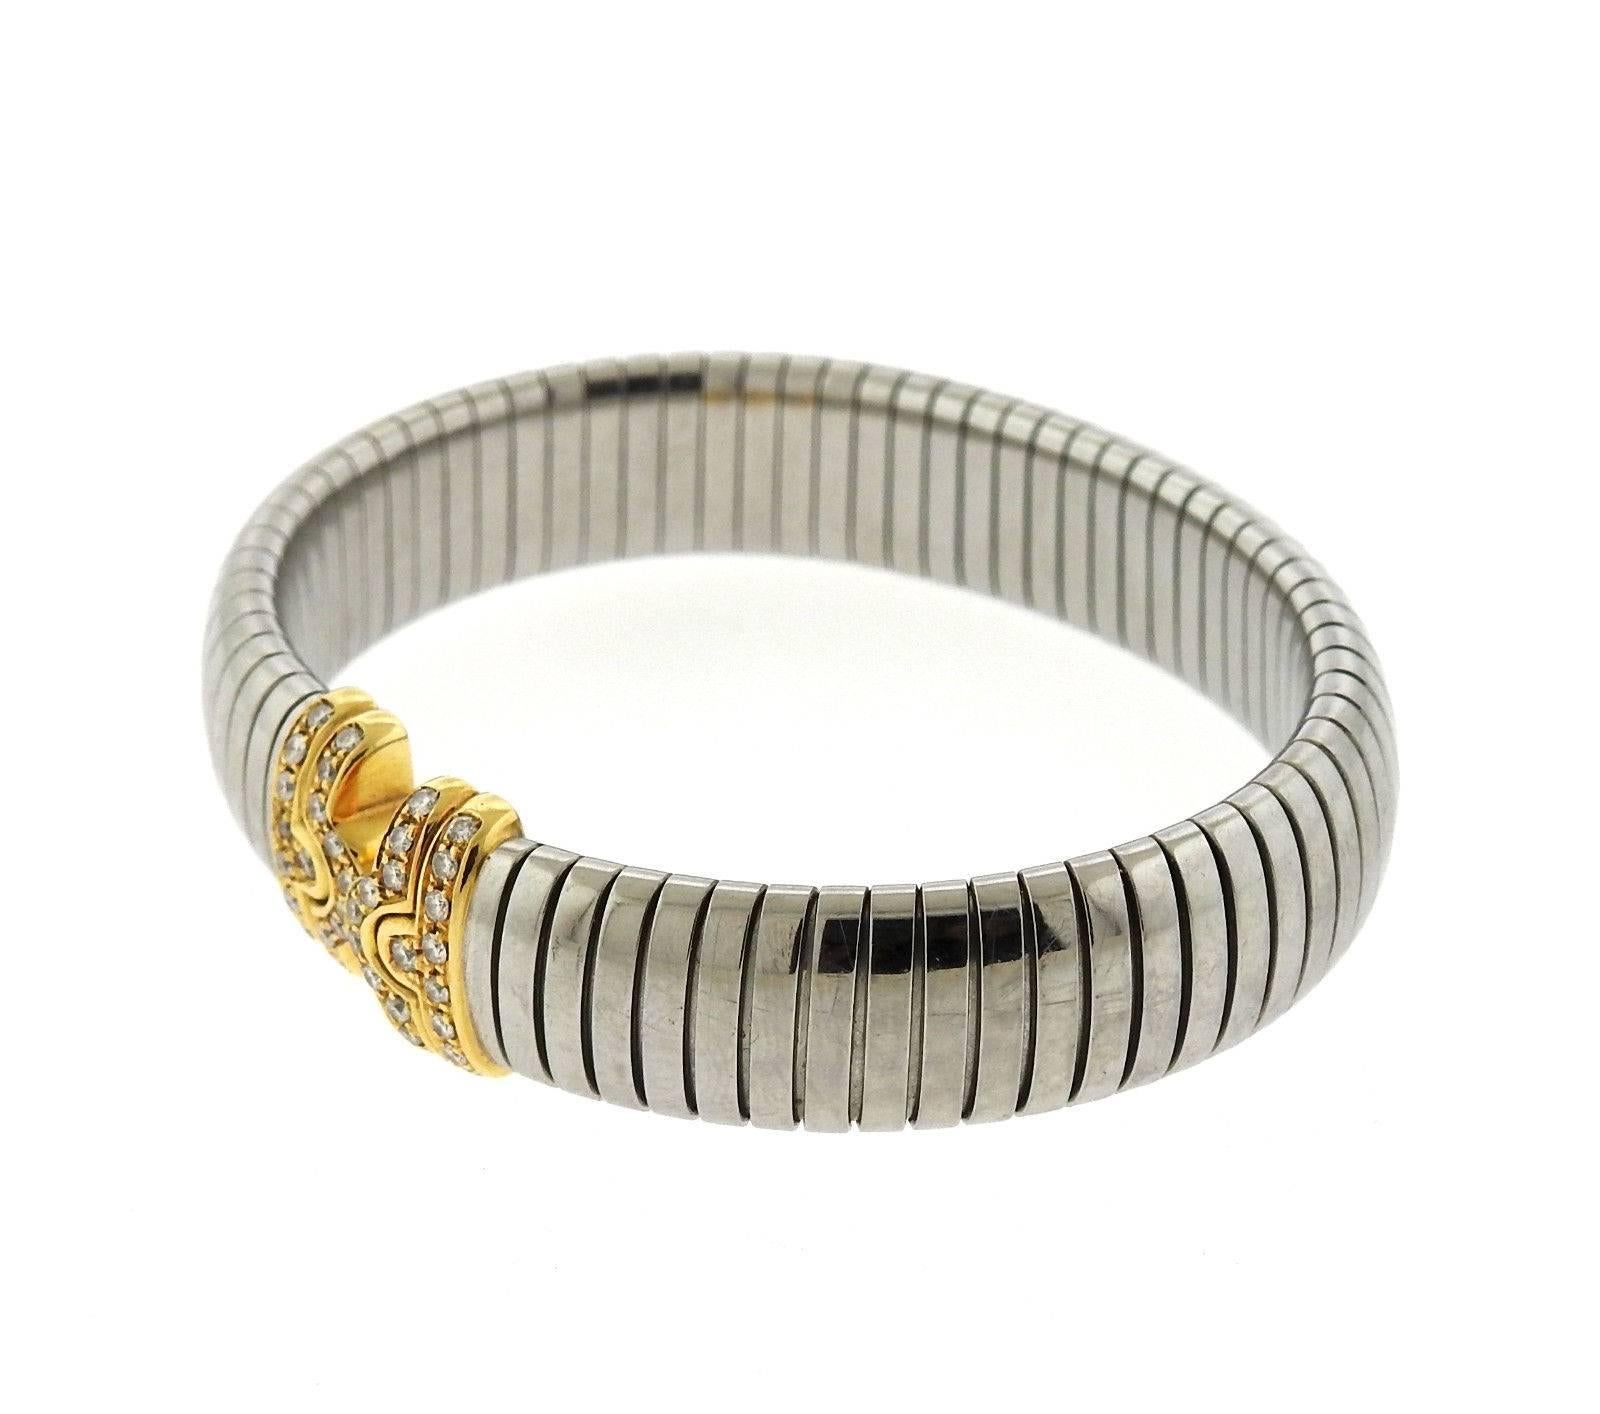 A stainless steel and 18k gold bracelet set with  G/VS diamonds.  The bracelet will fit up to 7